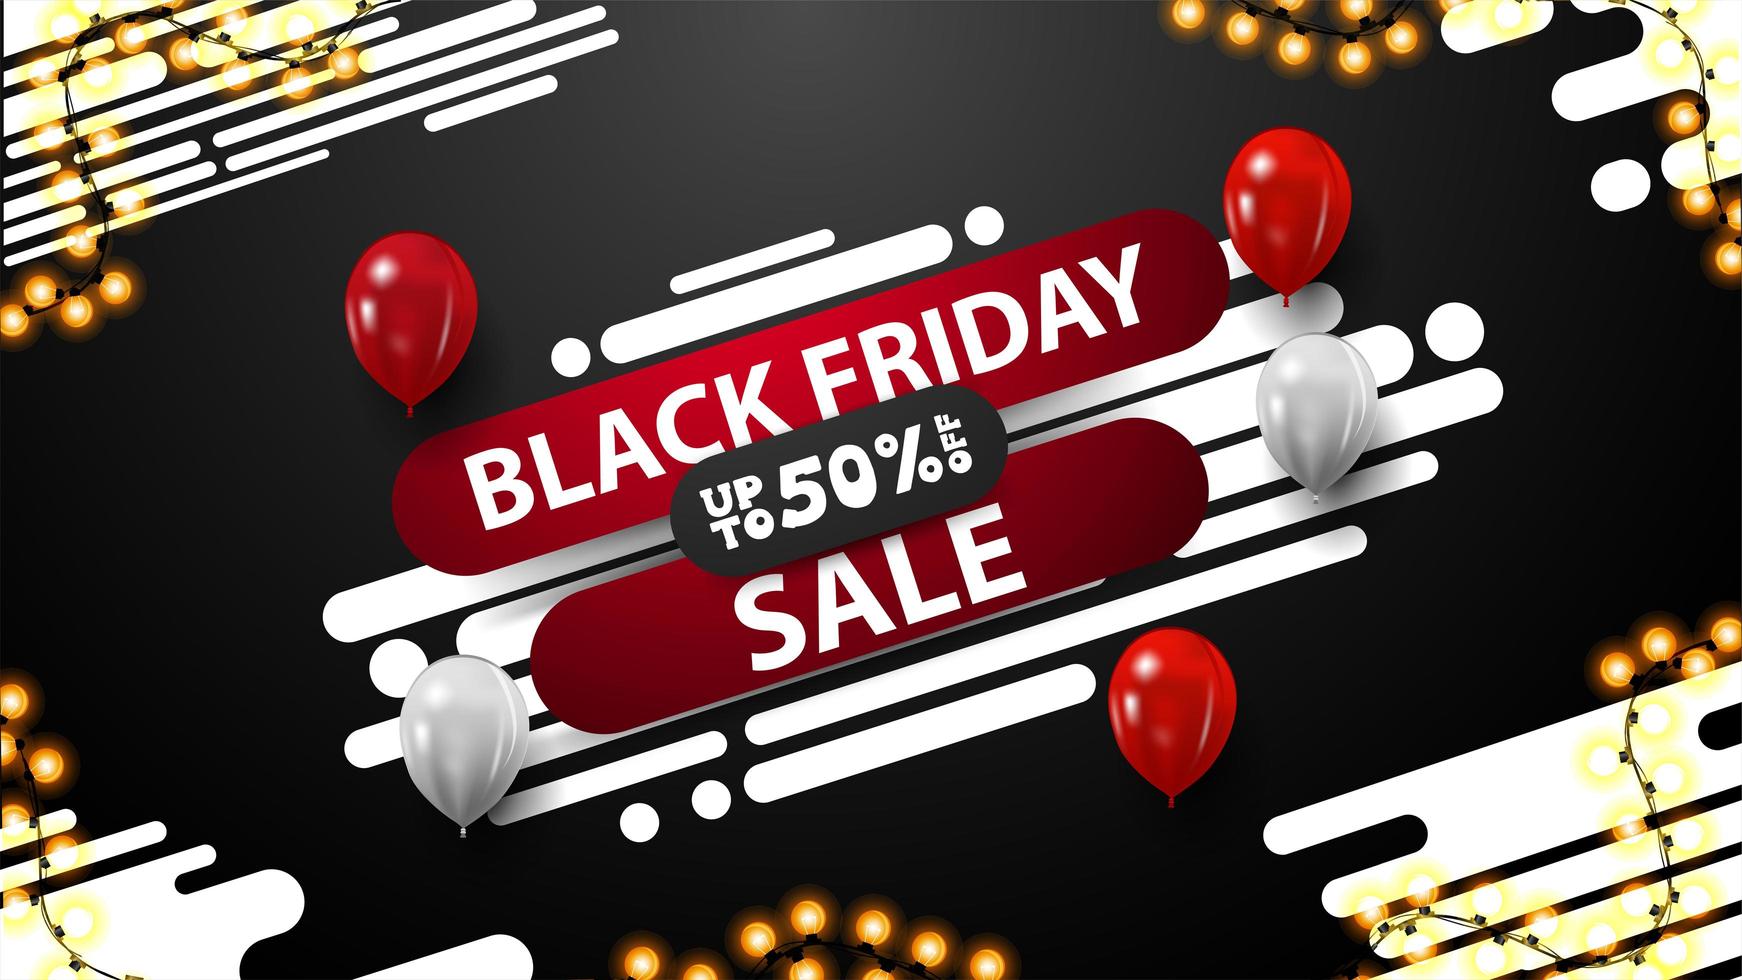 Black Friday discount banner with abstract shape vector